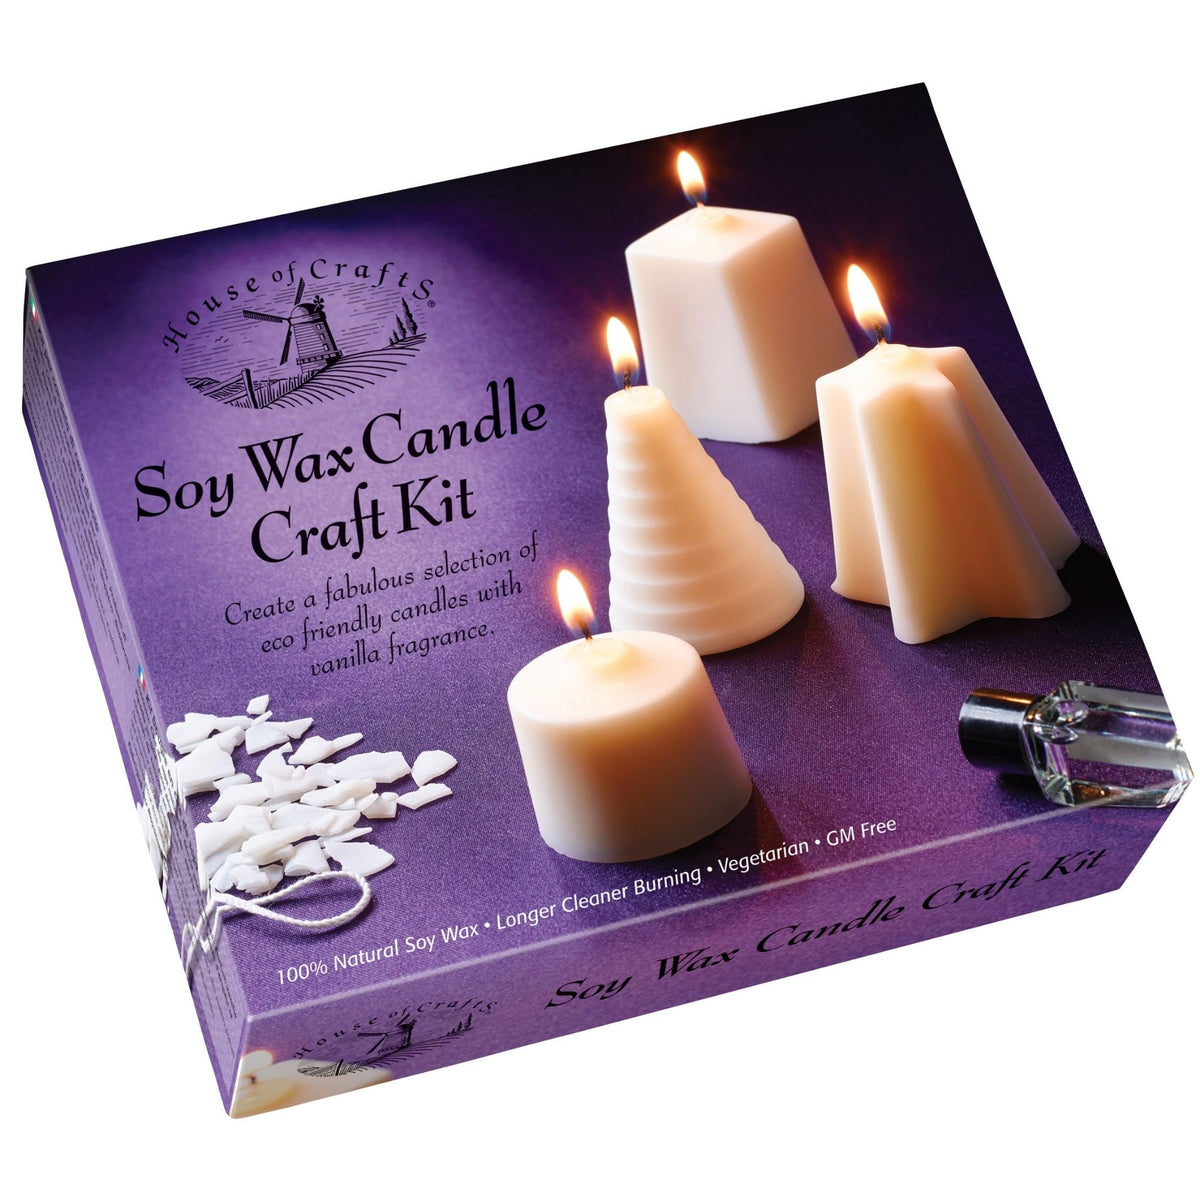 Soy Wax Candle Craft Kit Box